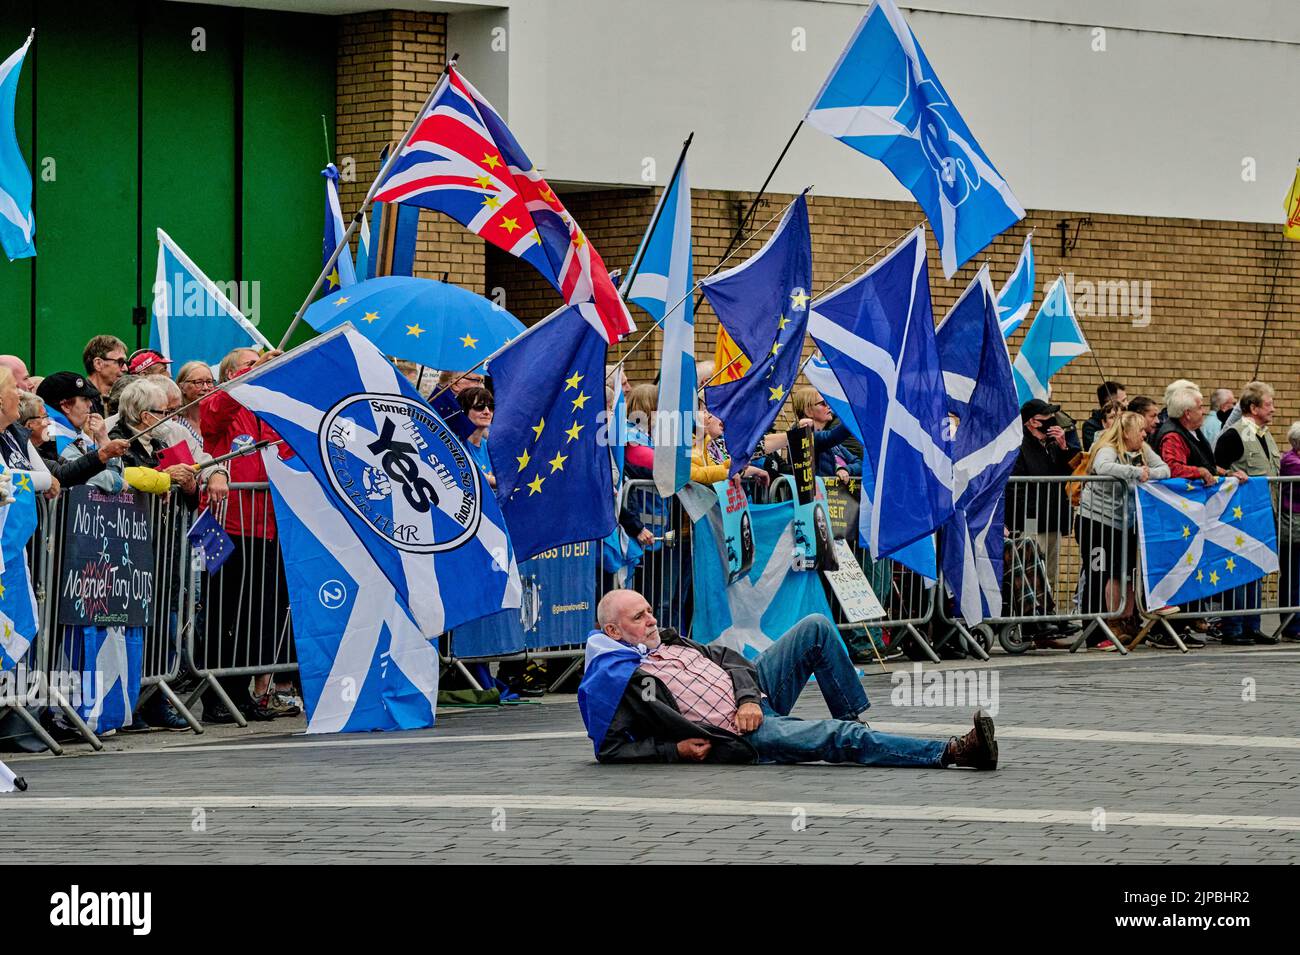 Perth Scotland, UK 16 August 2022. Protesters for a variety of causes gather outside Perth Concert Hall ahead of the Conservative Hustings that will decide the new Prime Minister. credit sst/alamy live news Stock Photo